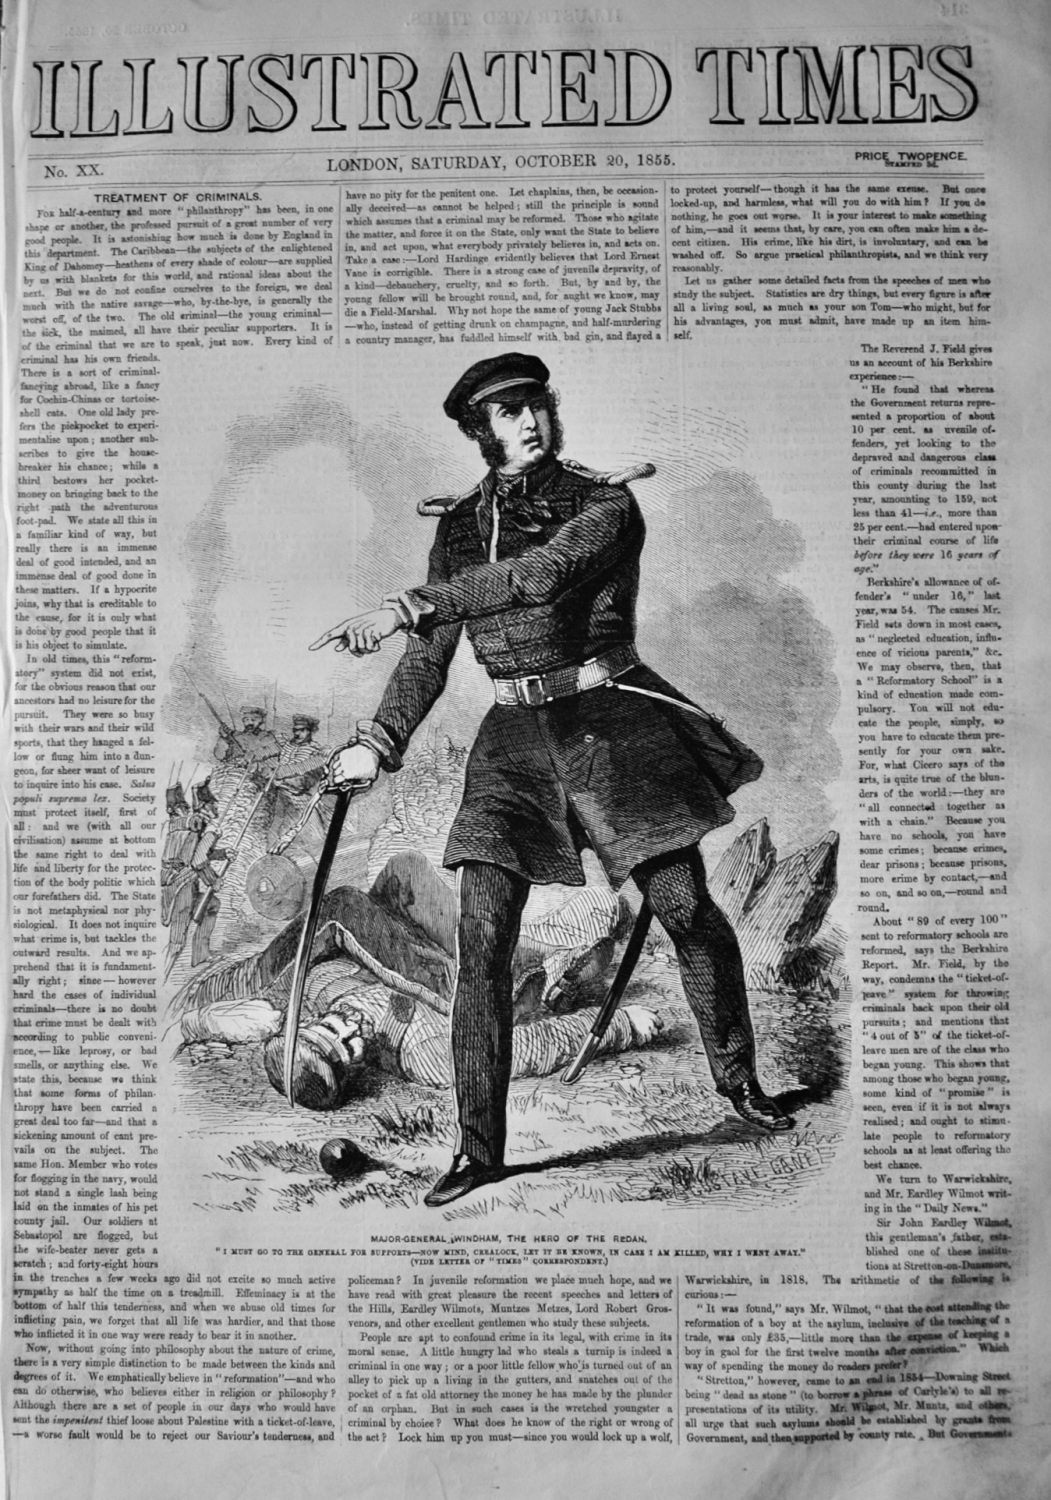 Illustrated Times, October 20th, 1855.